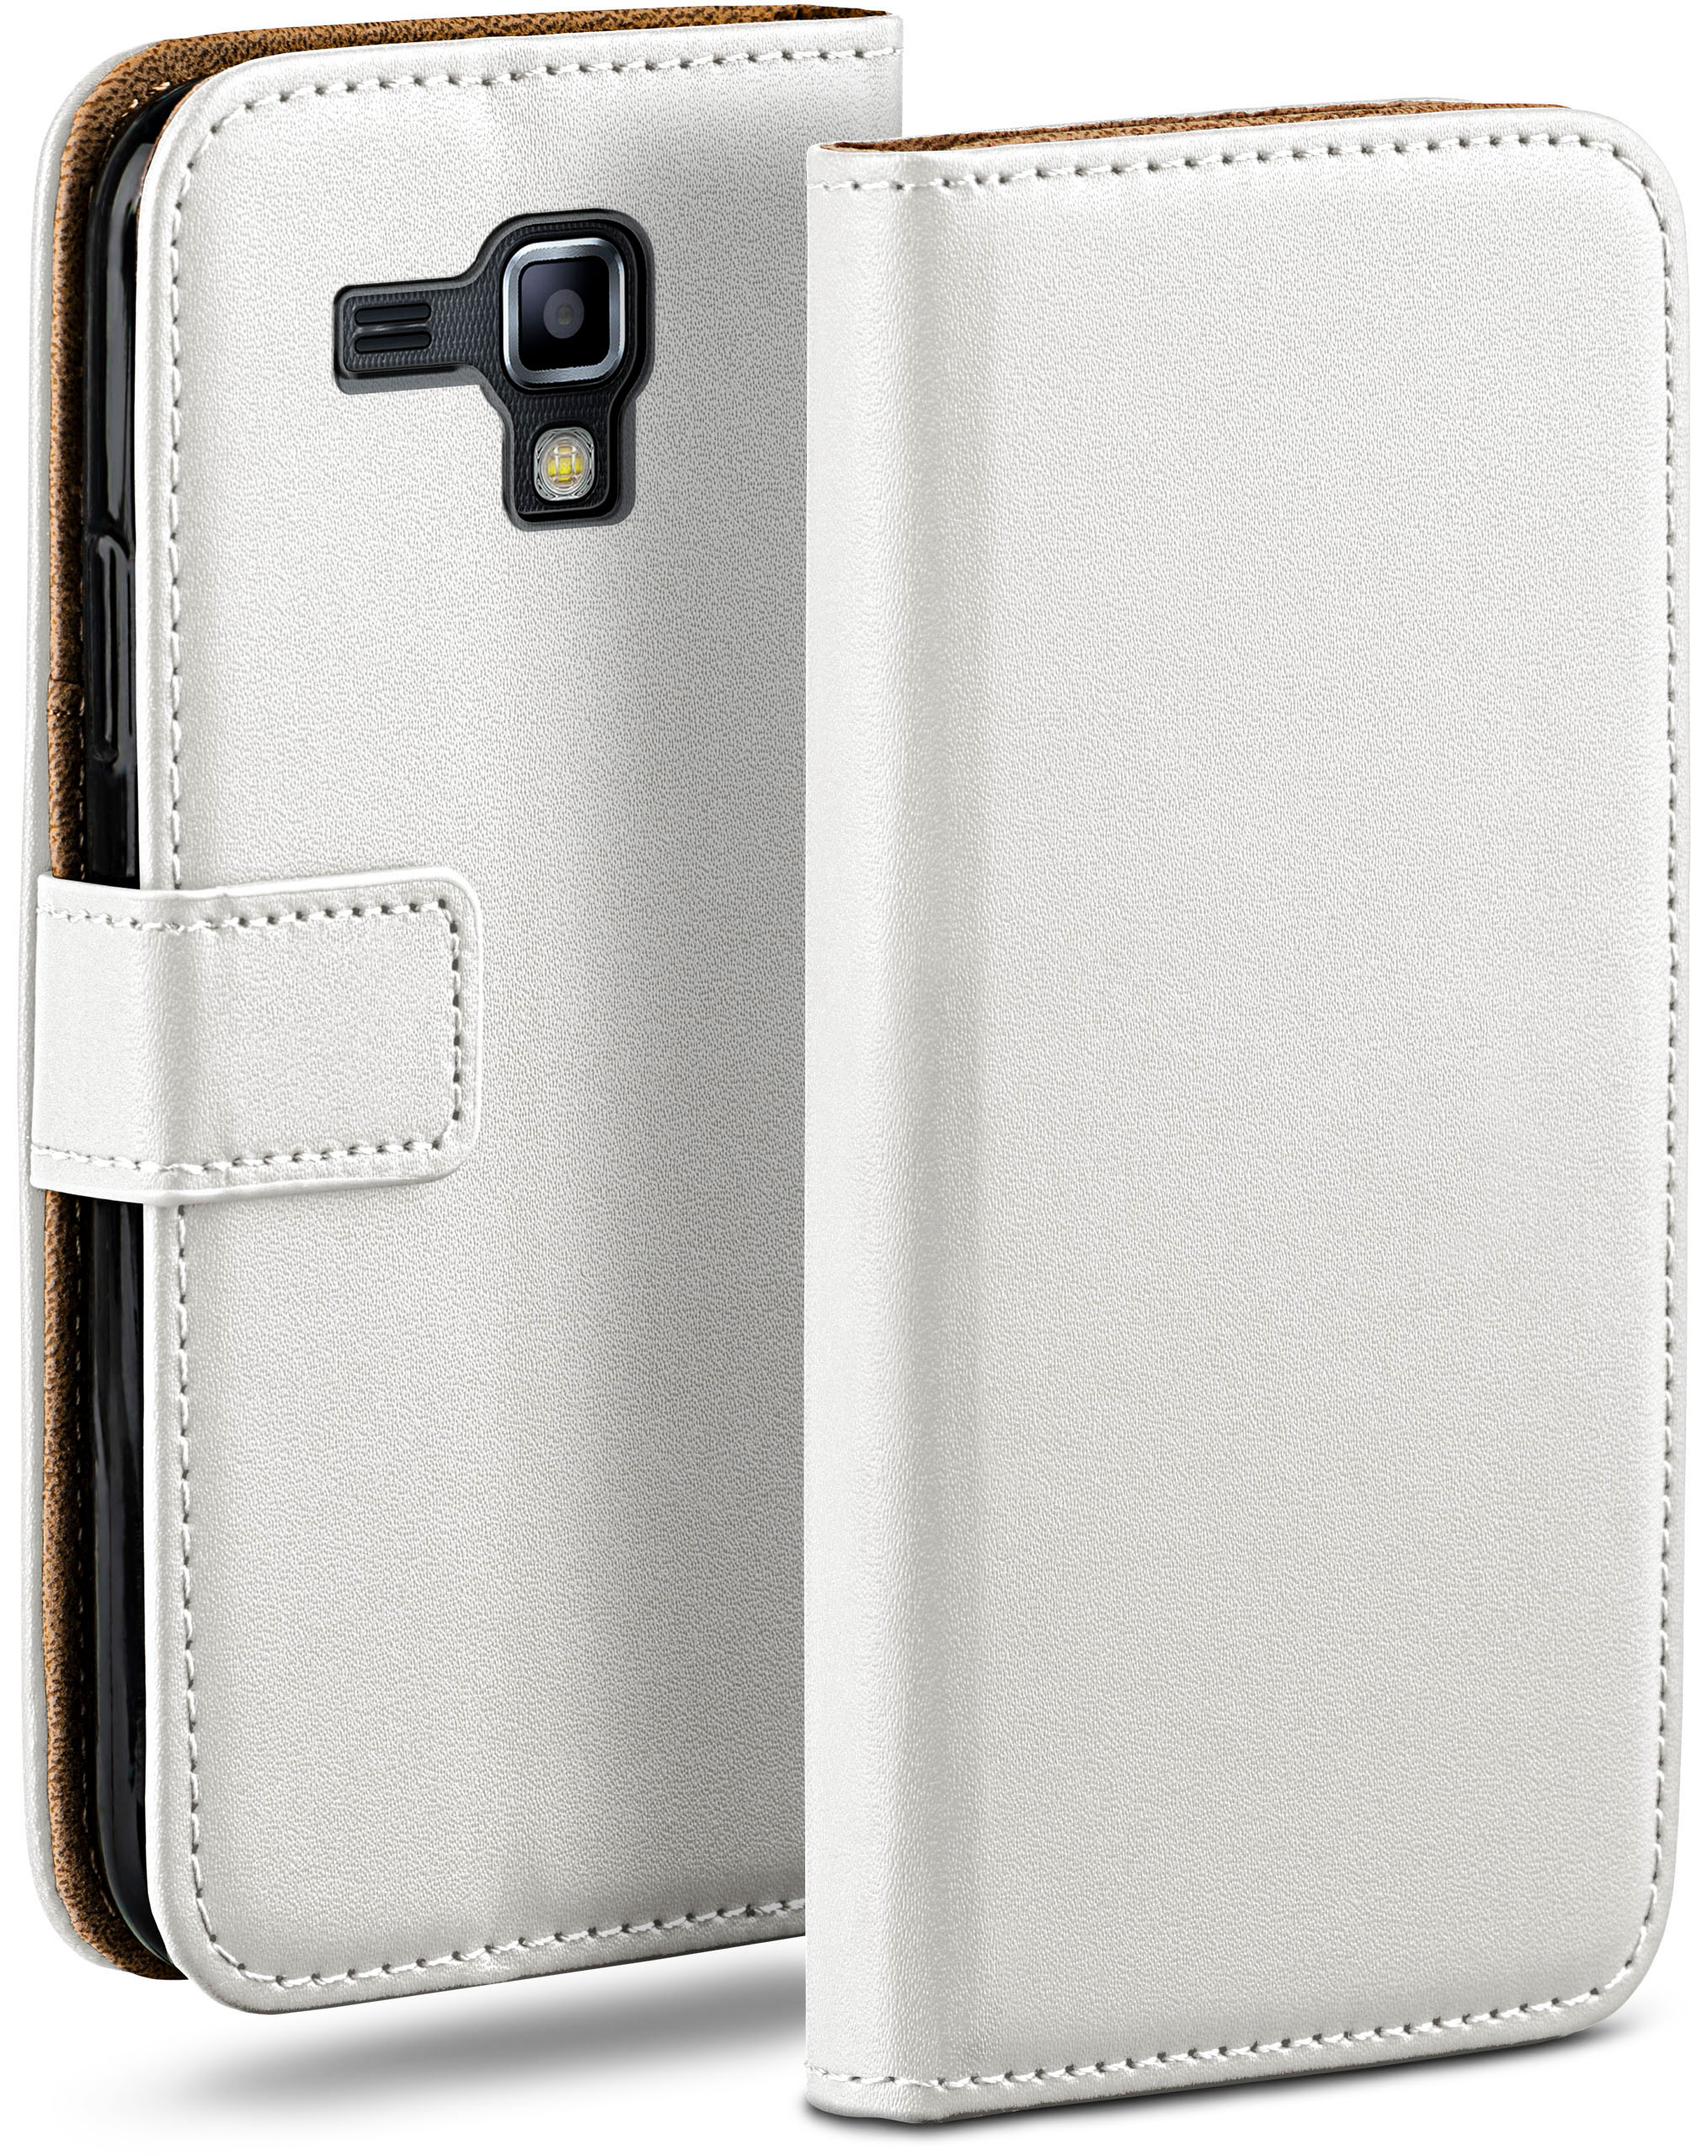 MOEX Book Duos Bookcover, Galaxy 2, Case, Pearl-White Samsung, S